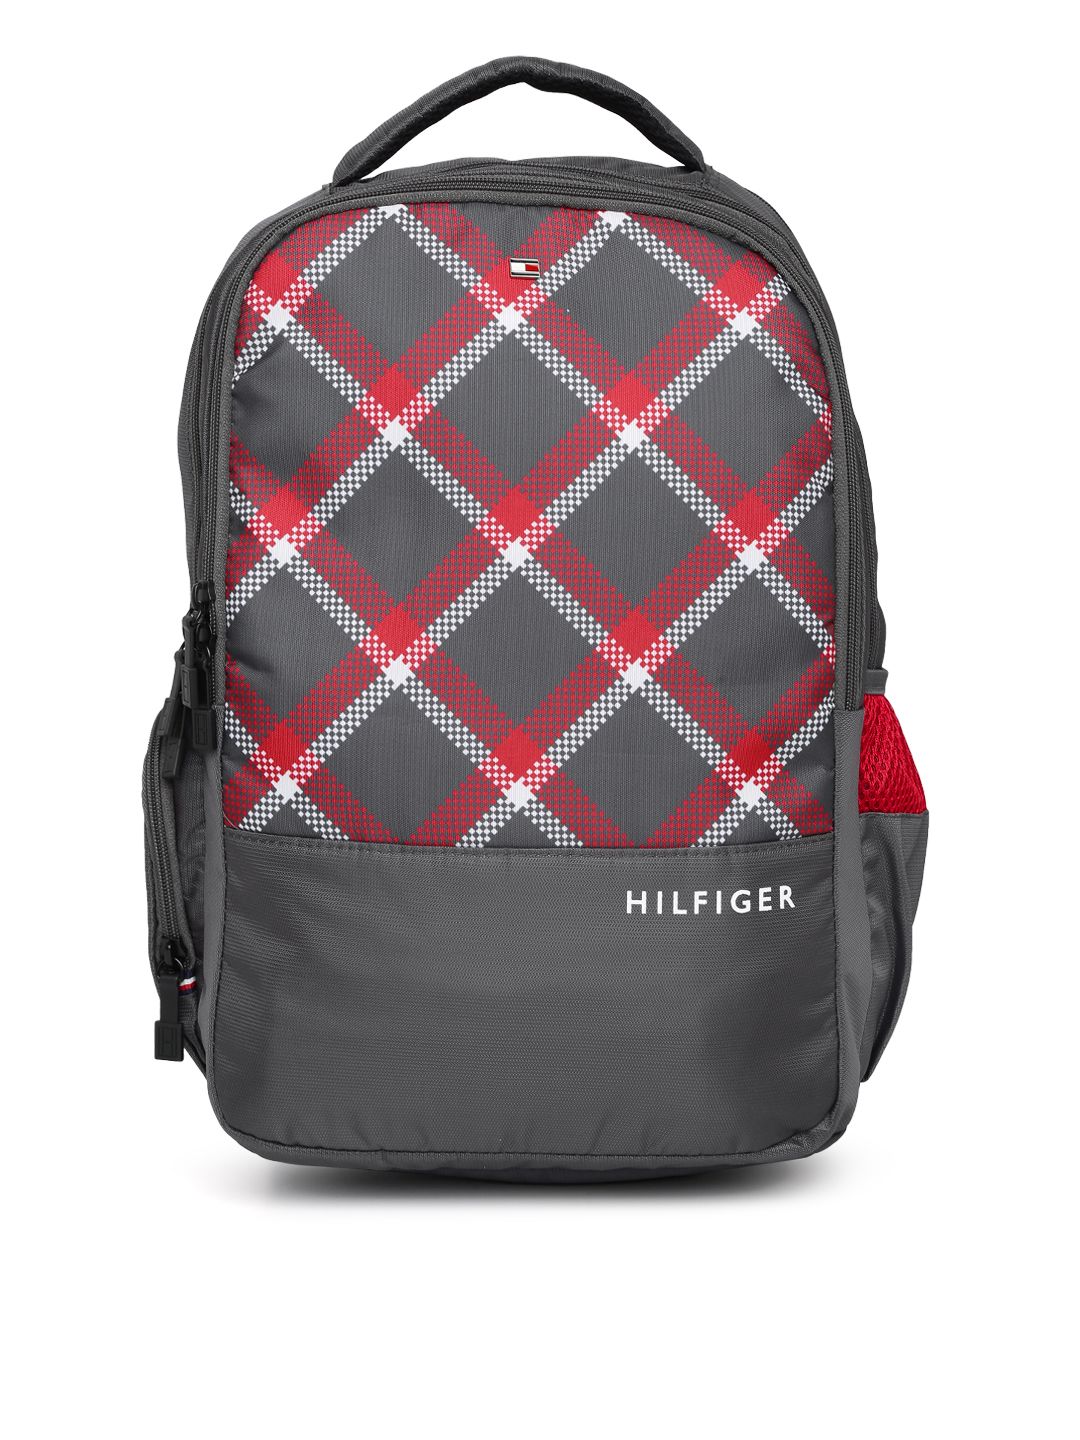 Tommy Hilfiger Unisex Grey & Red Geometric Backpack Price in India